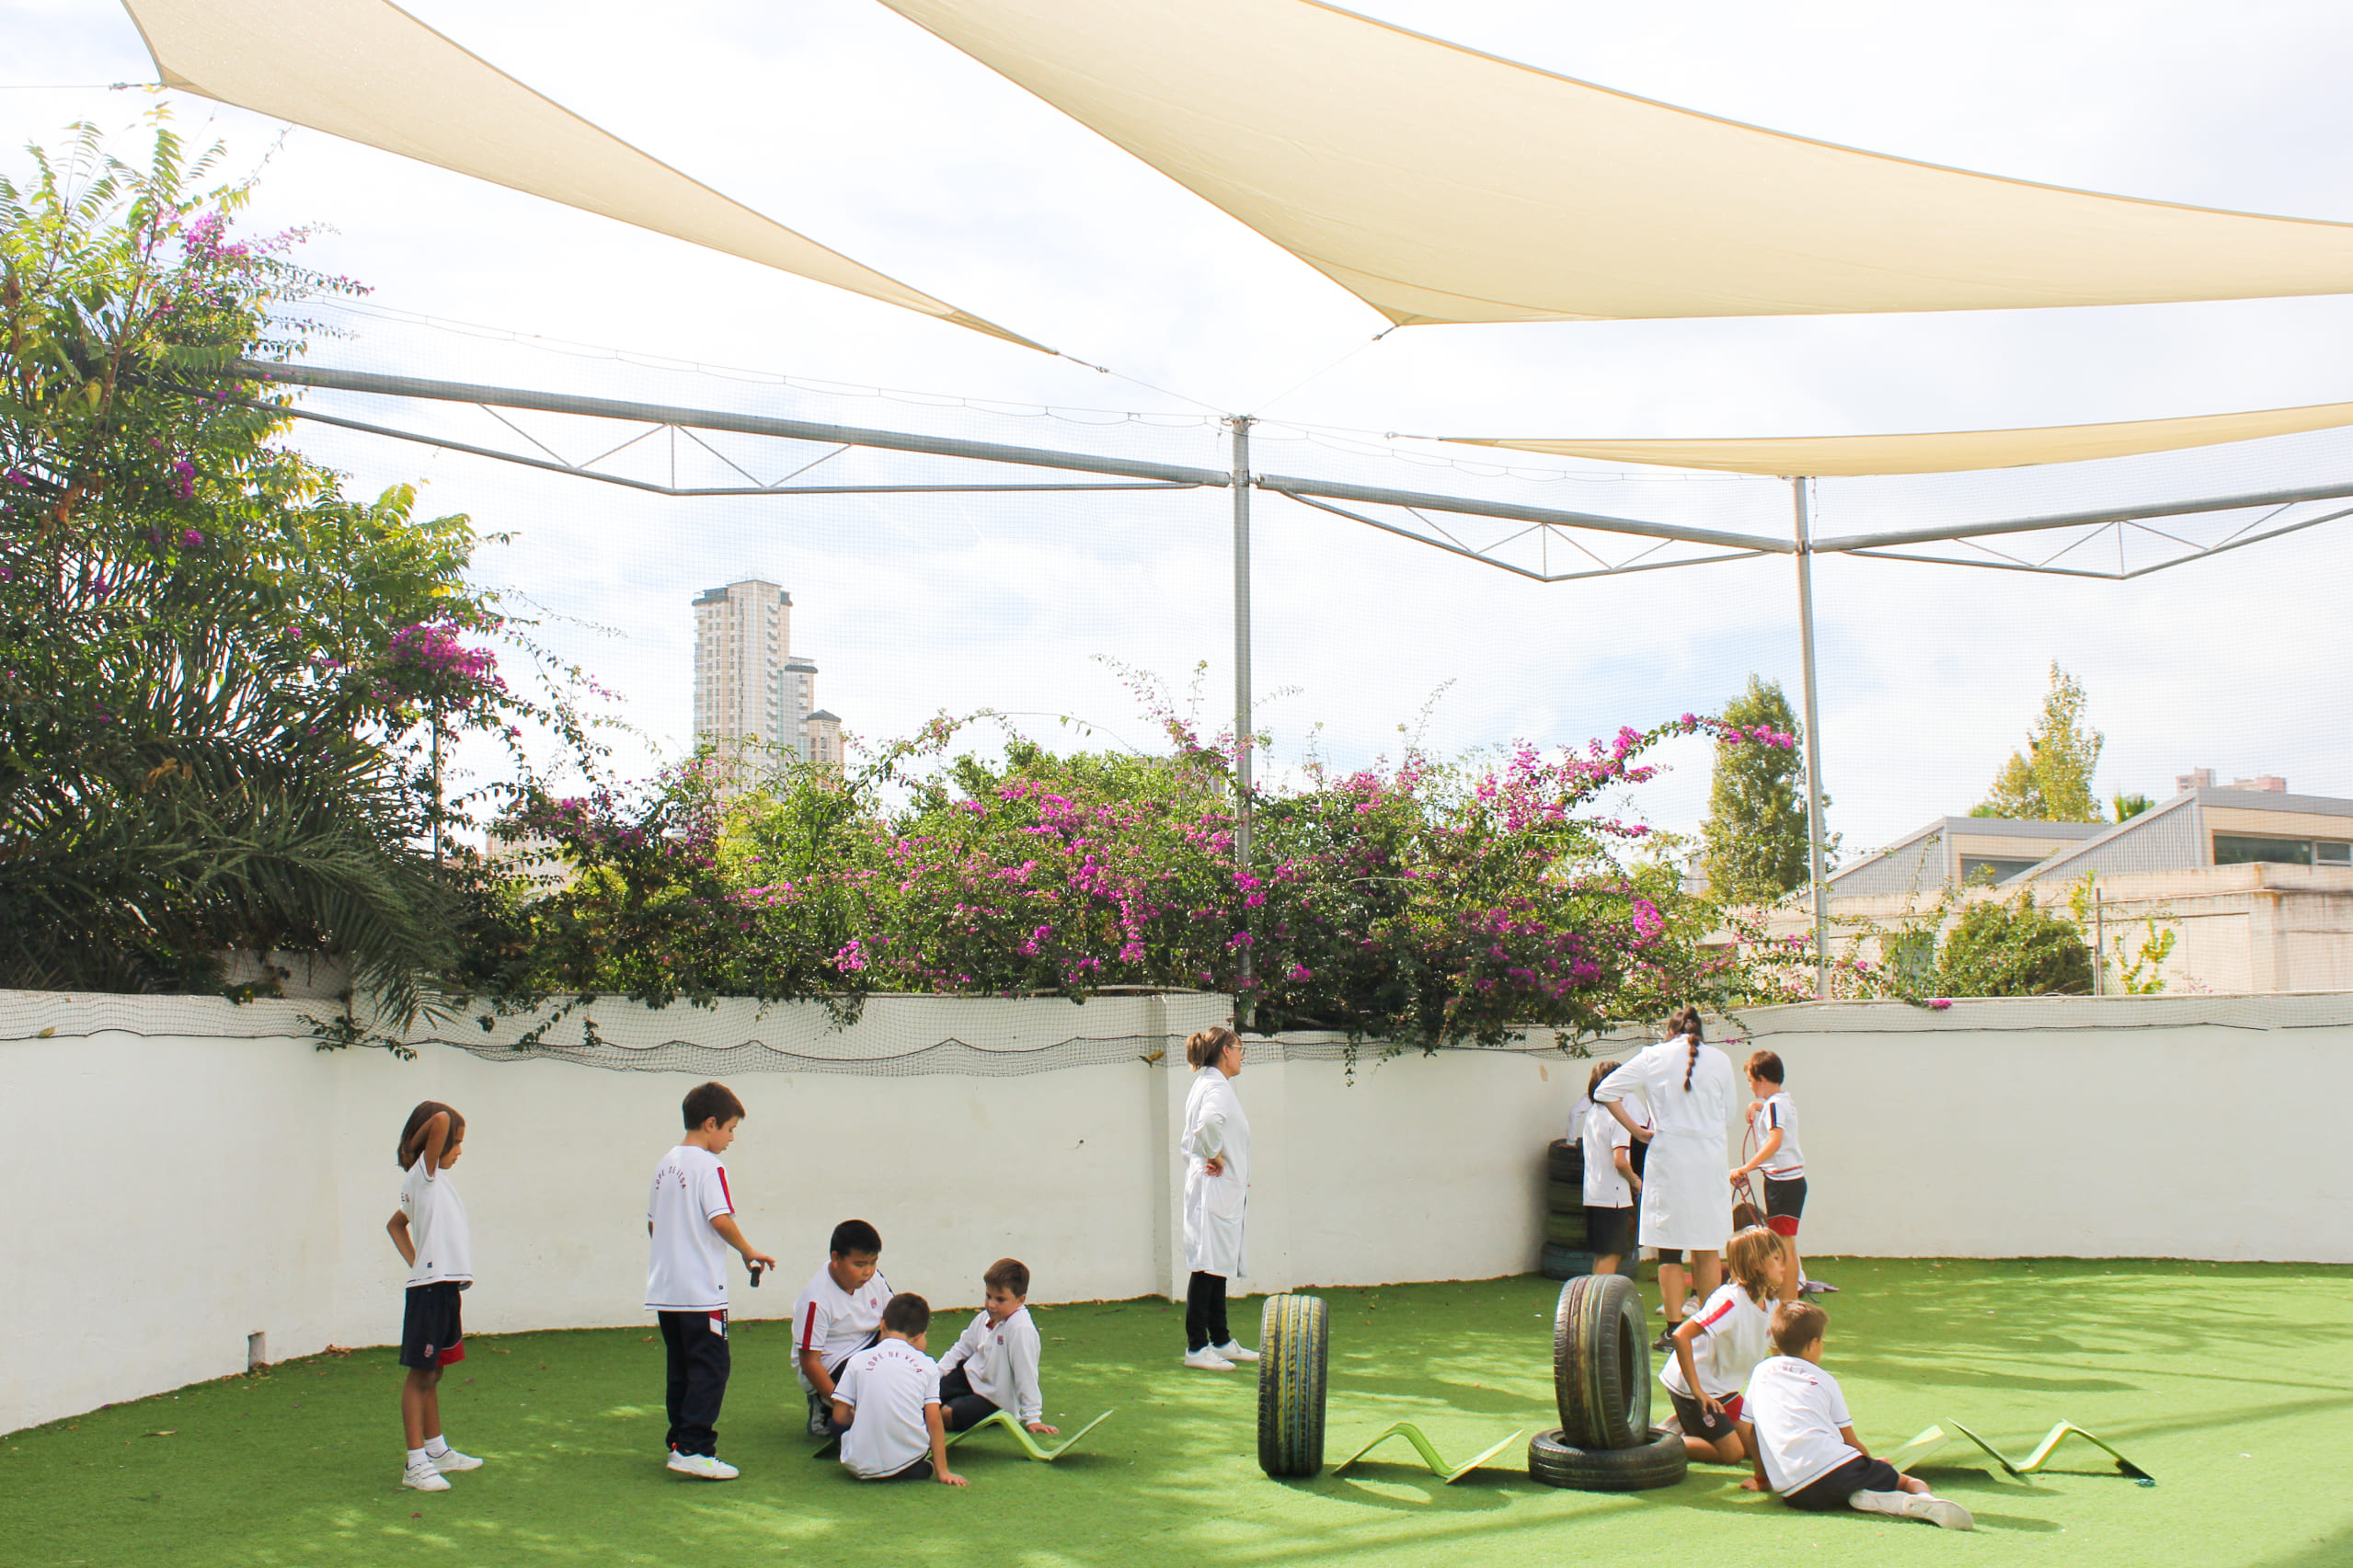 Improvements to playground facilities shaded areas artificial turf Lope de Vega School